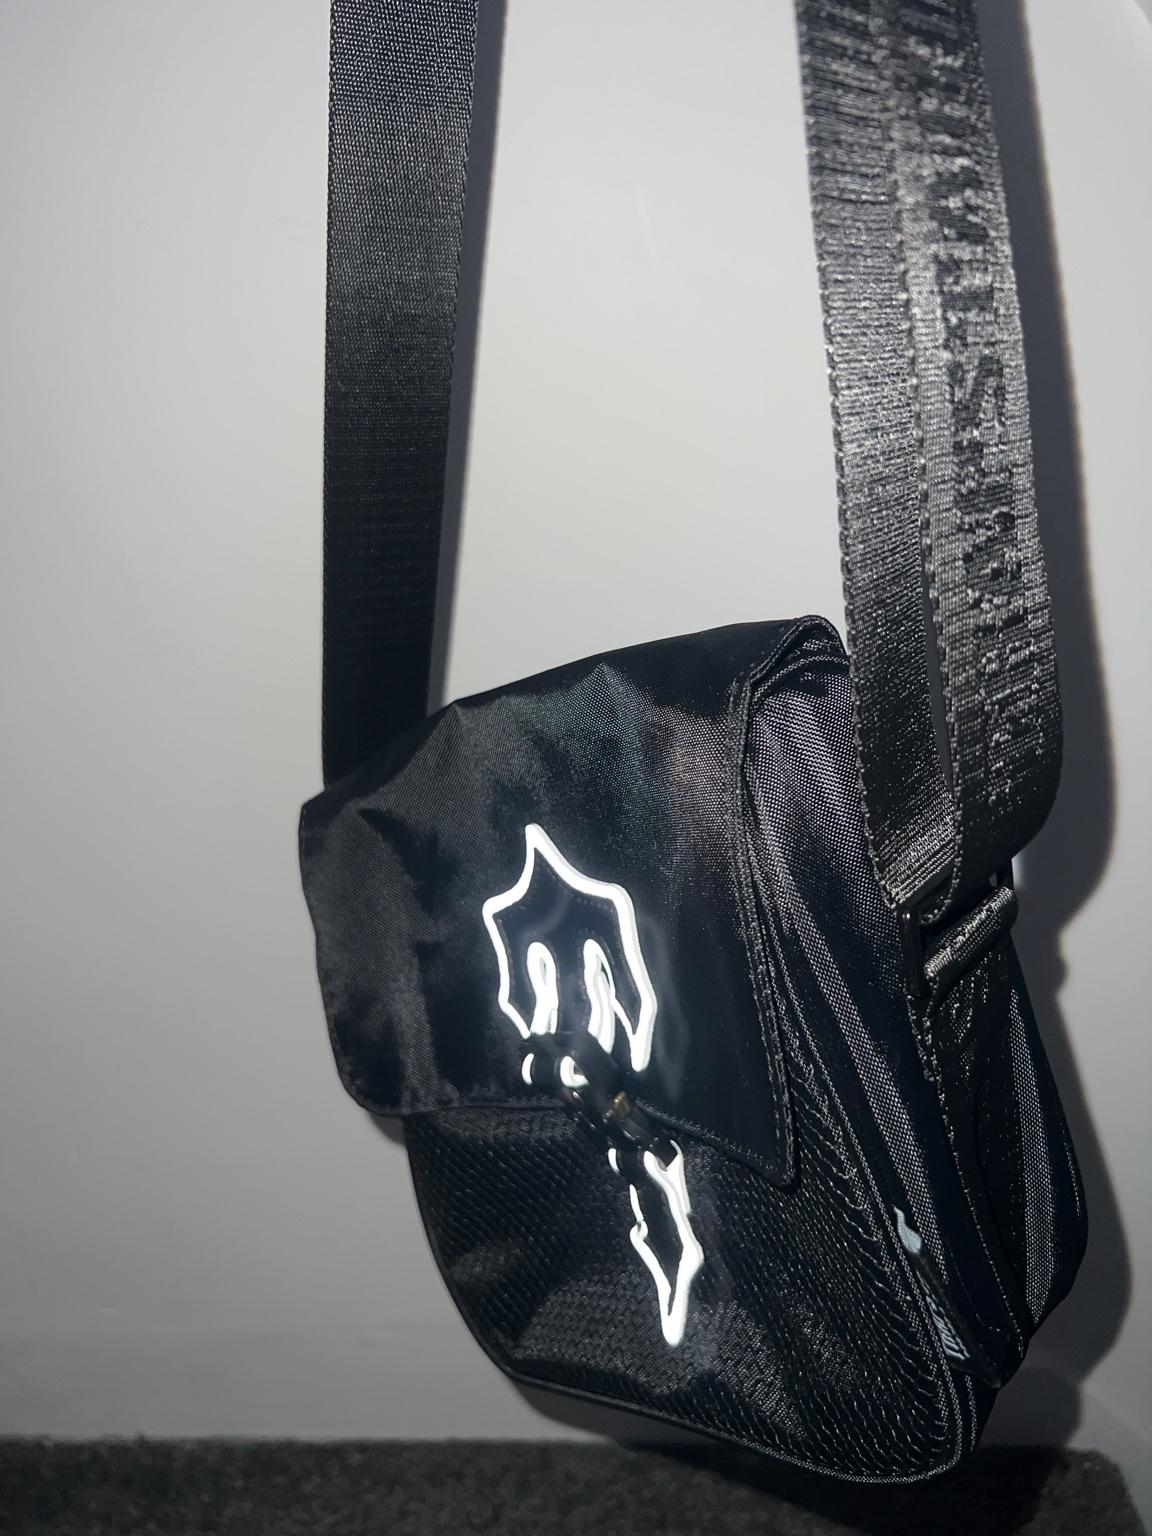 Trapstar reflective 1.0 Pouch **REP** in B62 Halesowen for £10.00 for ...